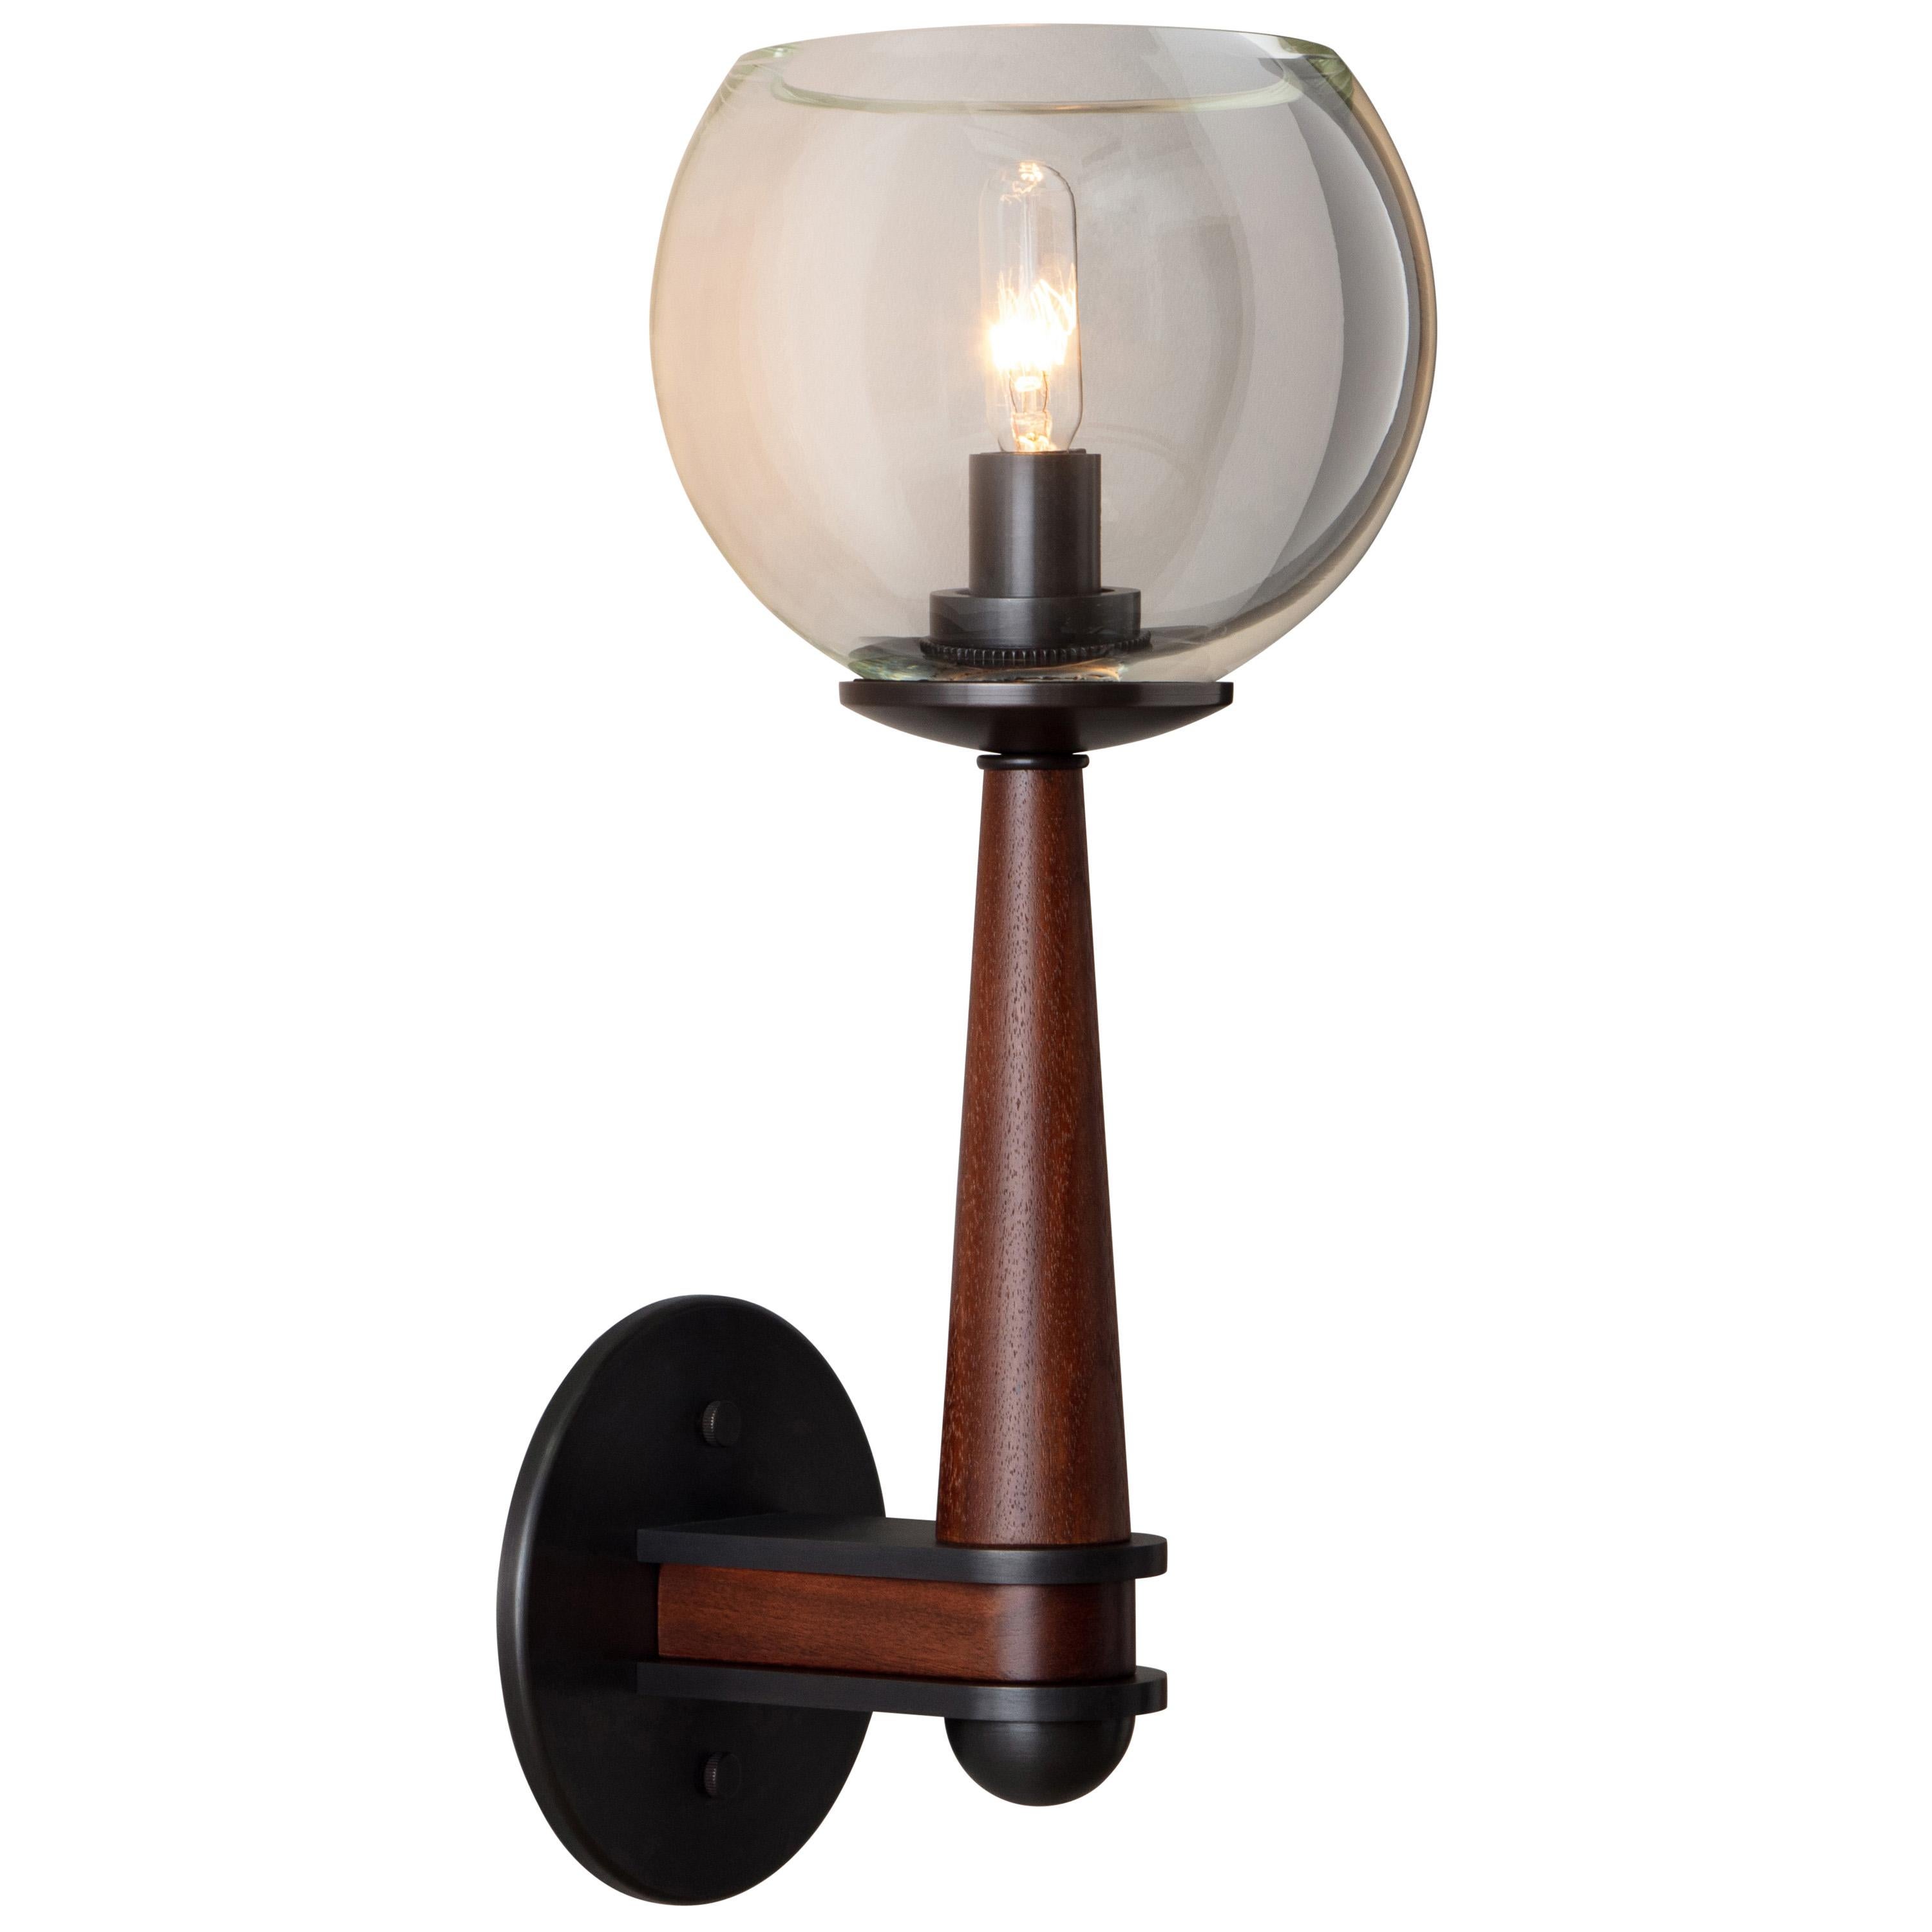 Giotto Sconce (Standard) in Walnut and Brass Finishes By Matthew Fairbank For Sale